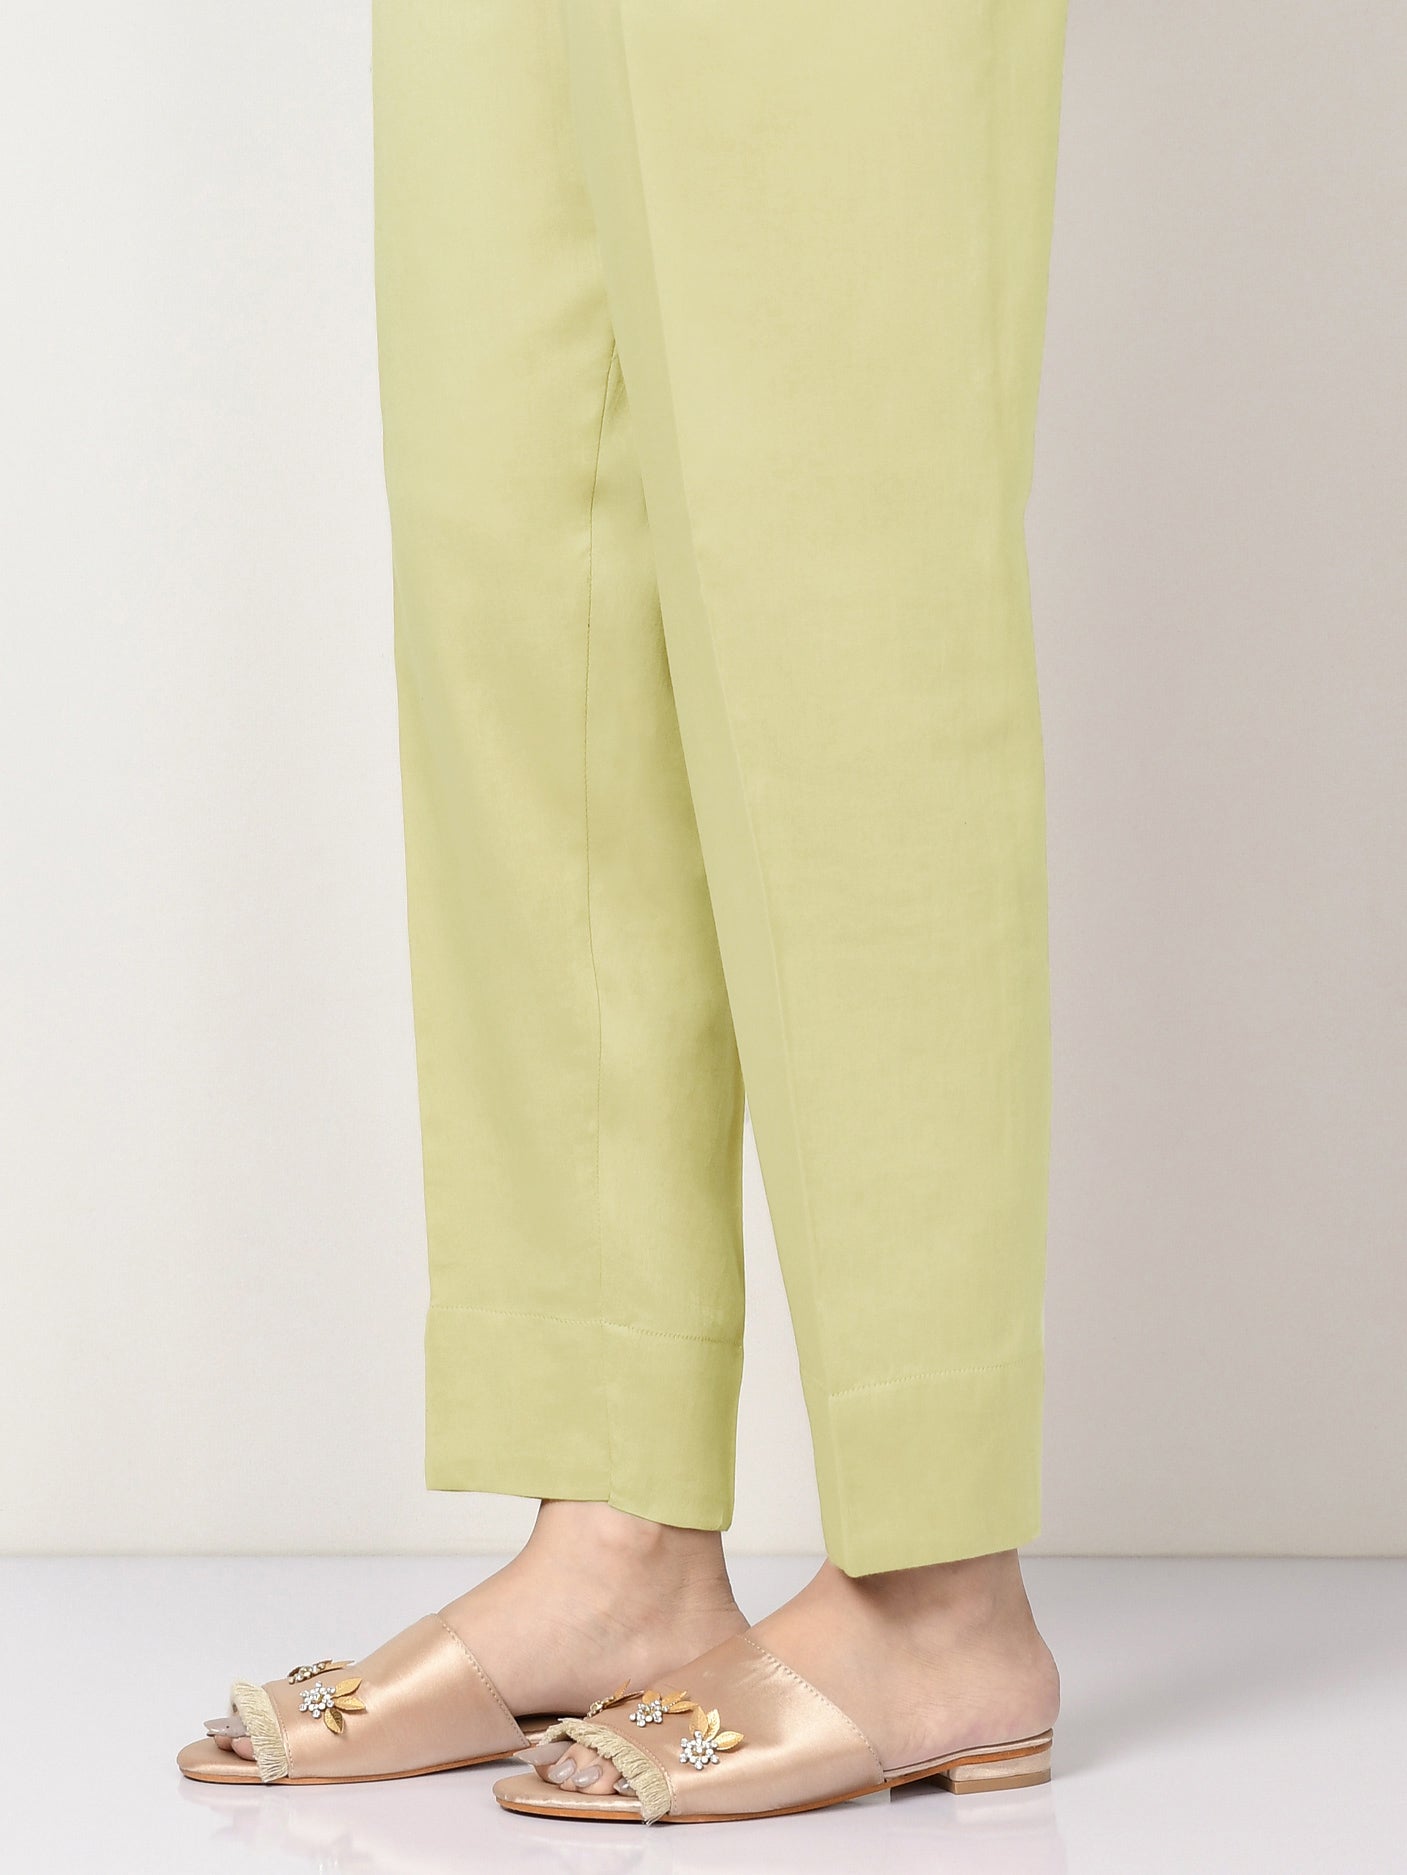 Dyed Cambric Trousers